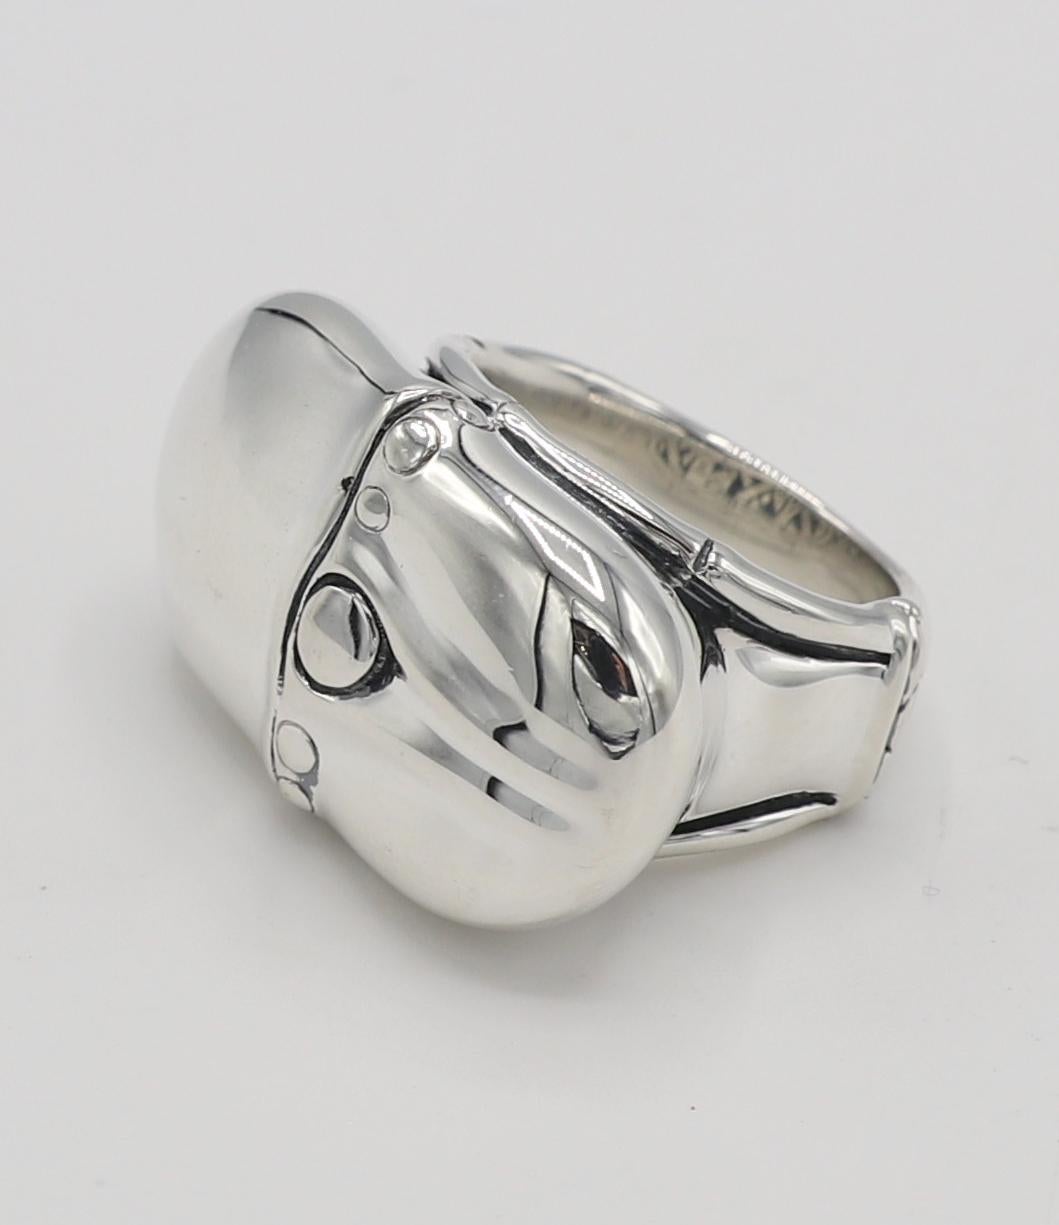 John Hardy Sterling Silver Ring 
Metal: Sterling silver 925
Weight: 19.22 grams
Size: 7 (US)
Top: 29 x 17.5mm